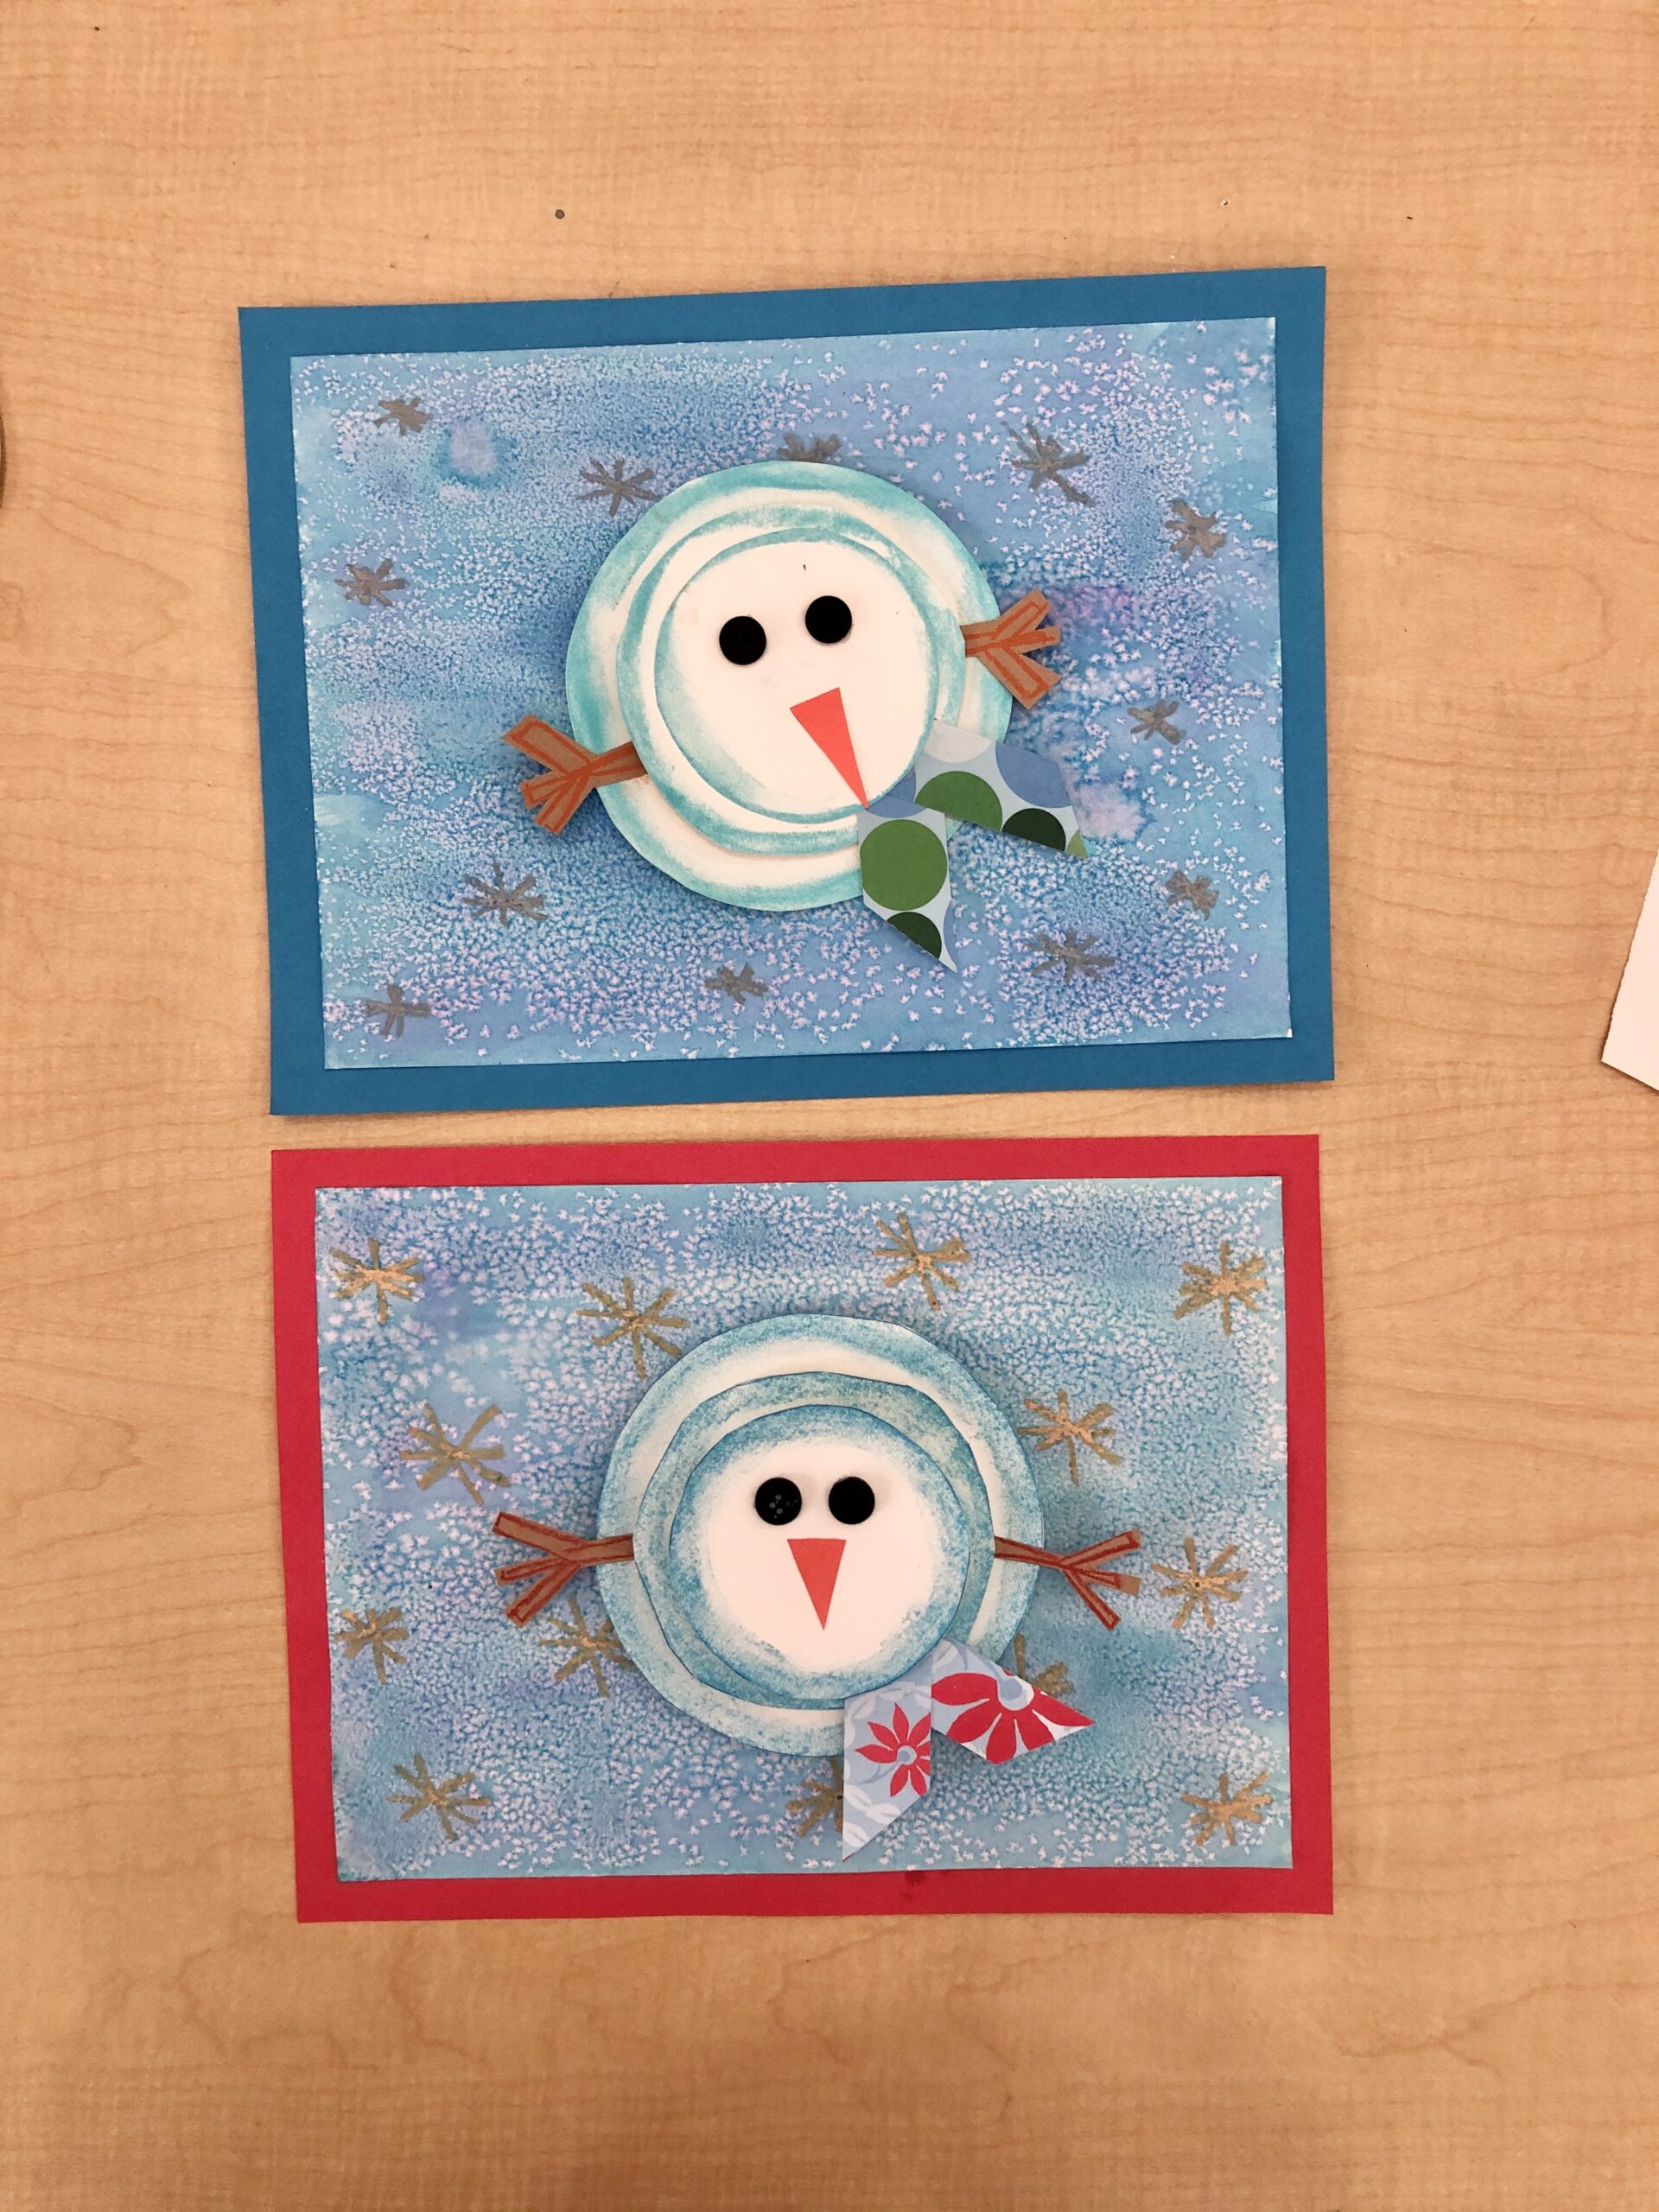 Learning about snowman Perspective Art while create a fun Winter Scene and an Adorable snowman.